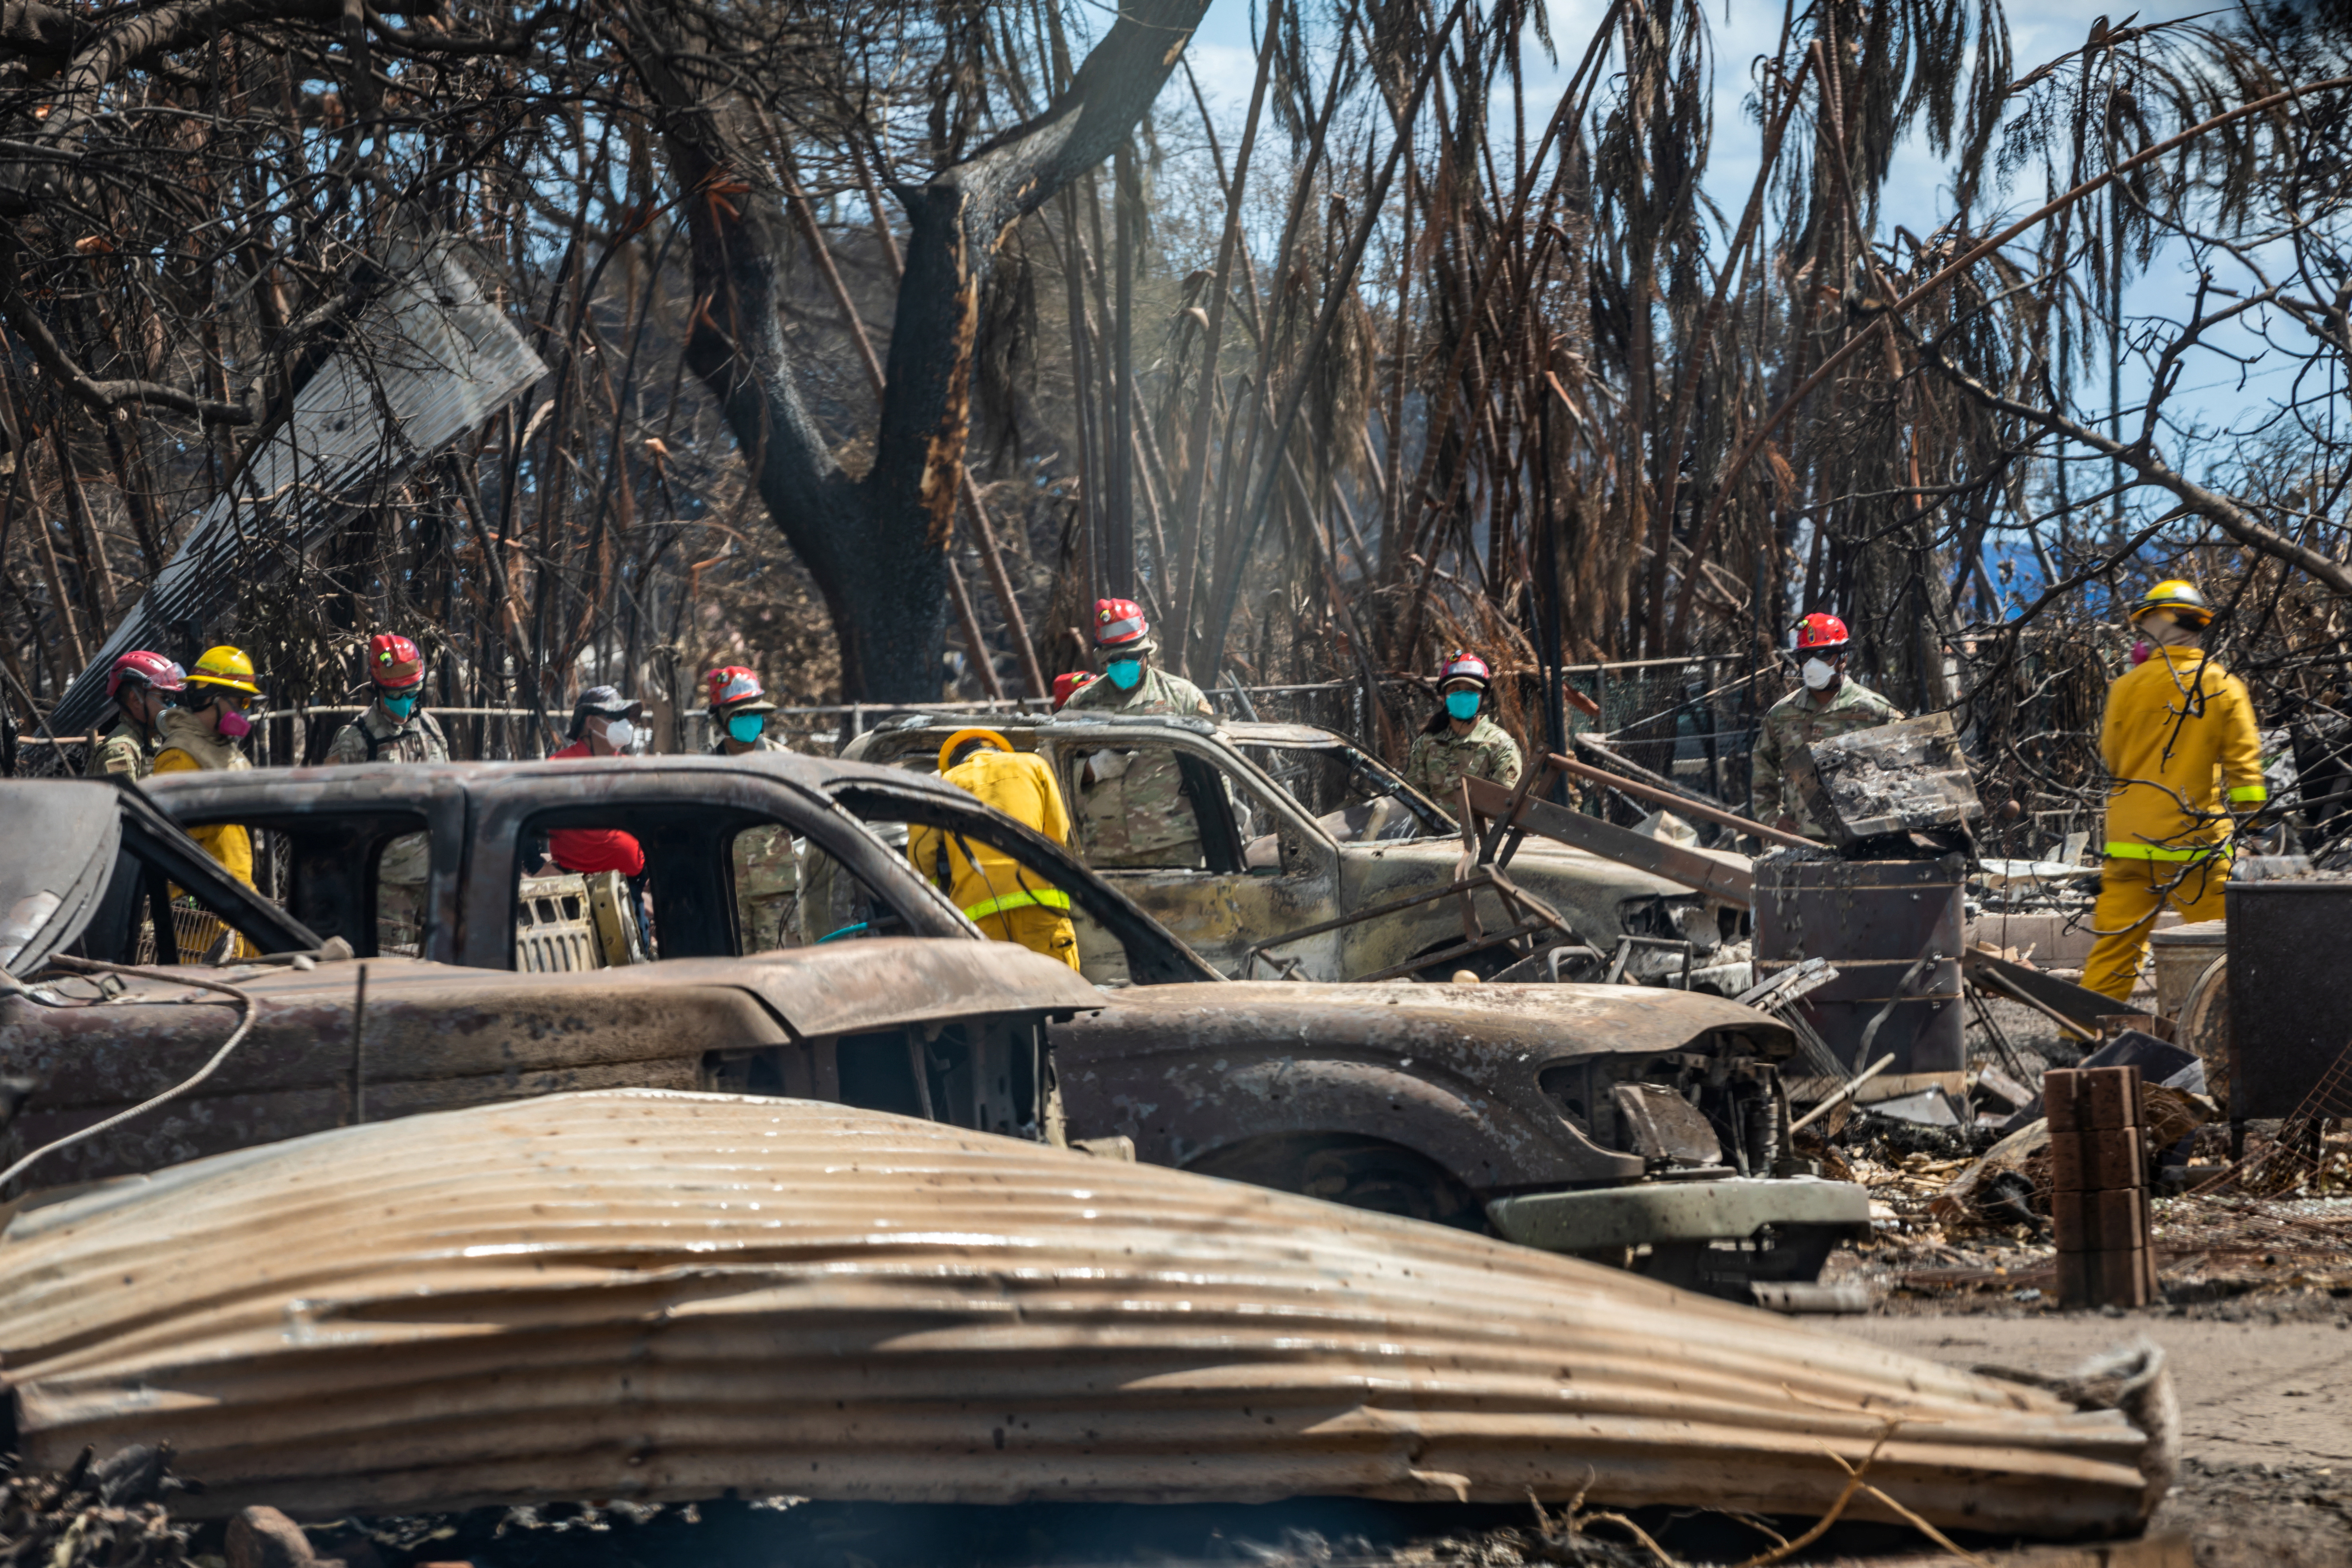 Search, rescue and recovery personnel conduct search operations of areas damaged by Maui wildfires